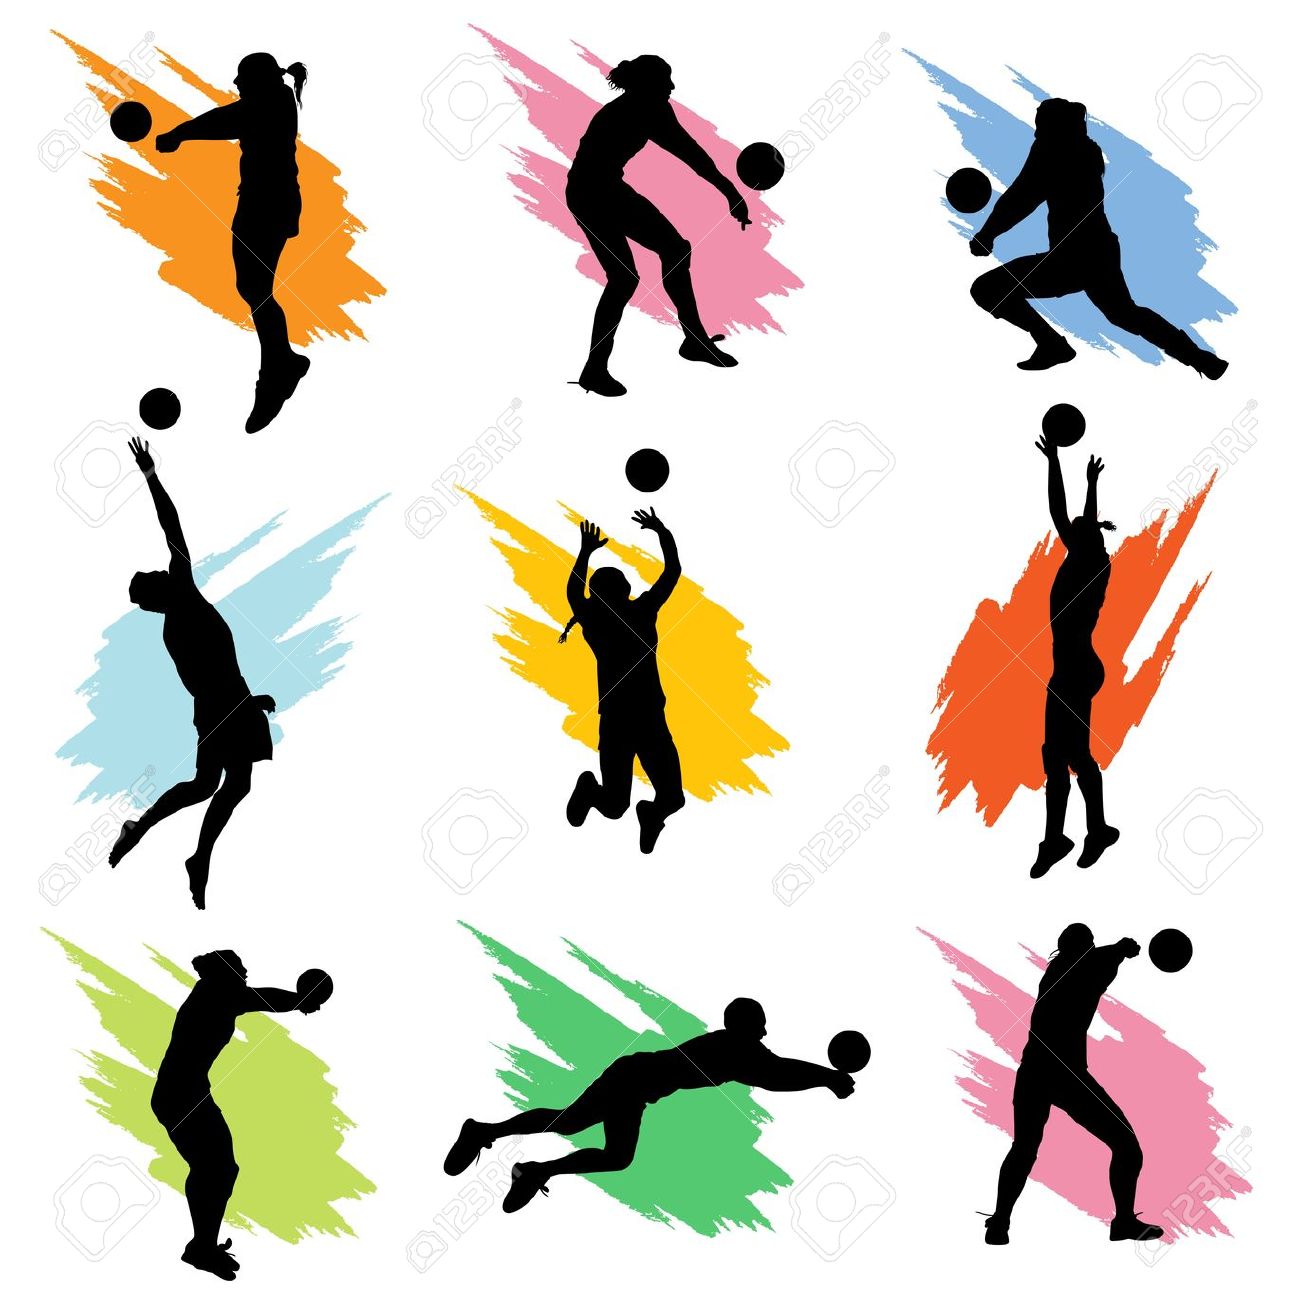 clipart free volleyball - photo #45